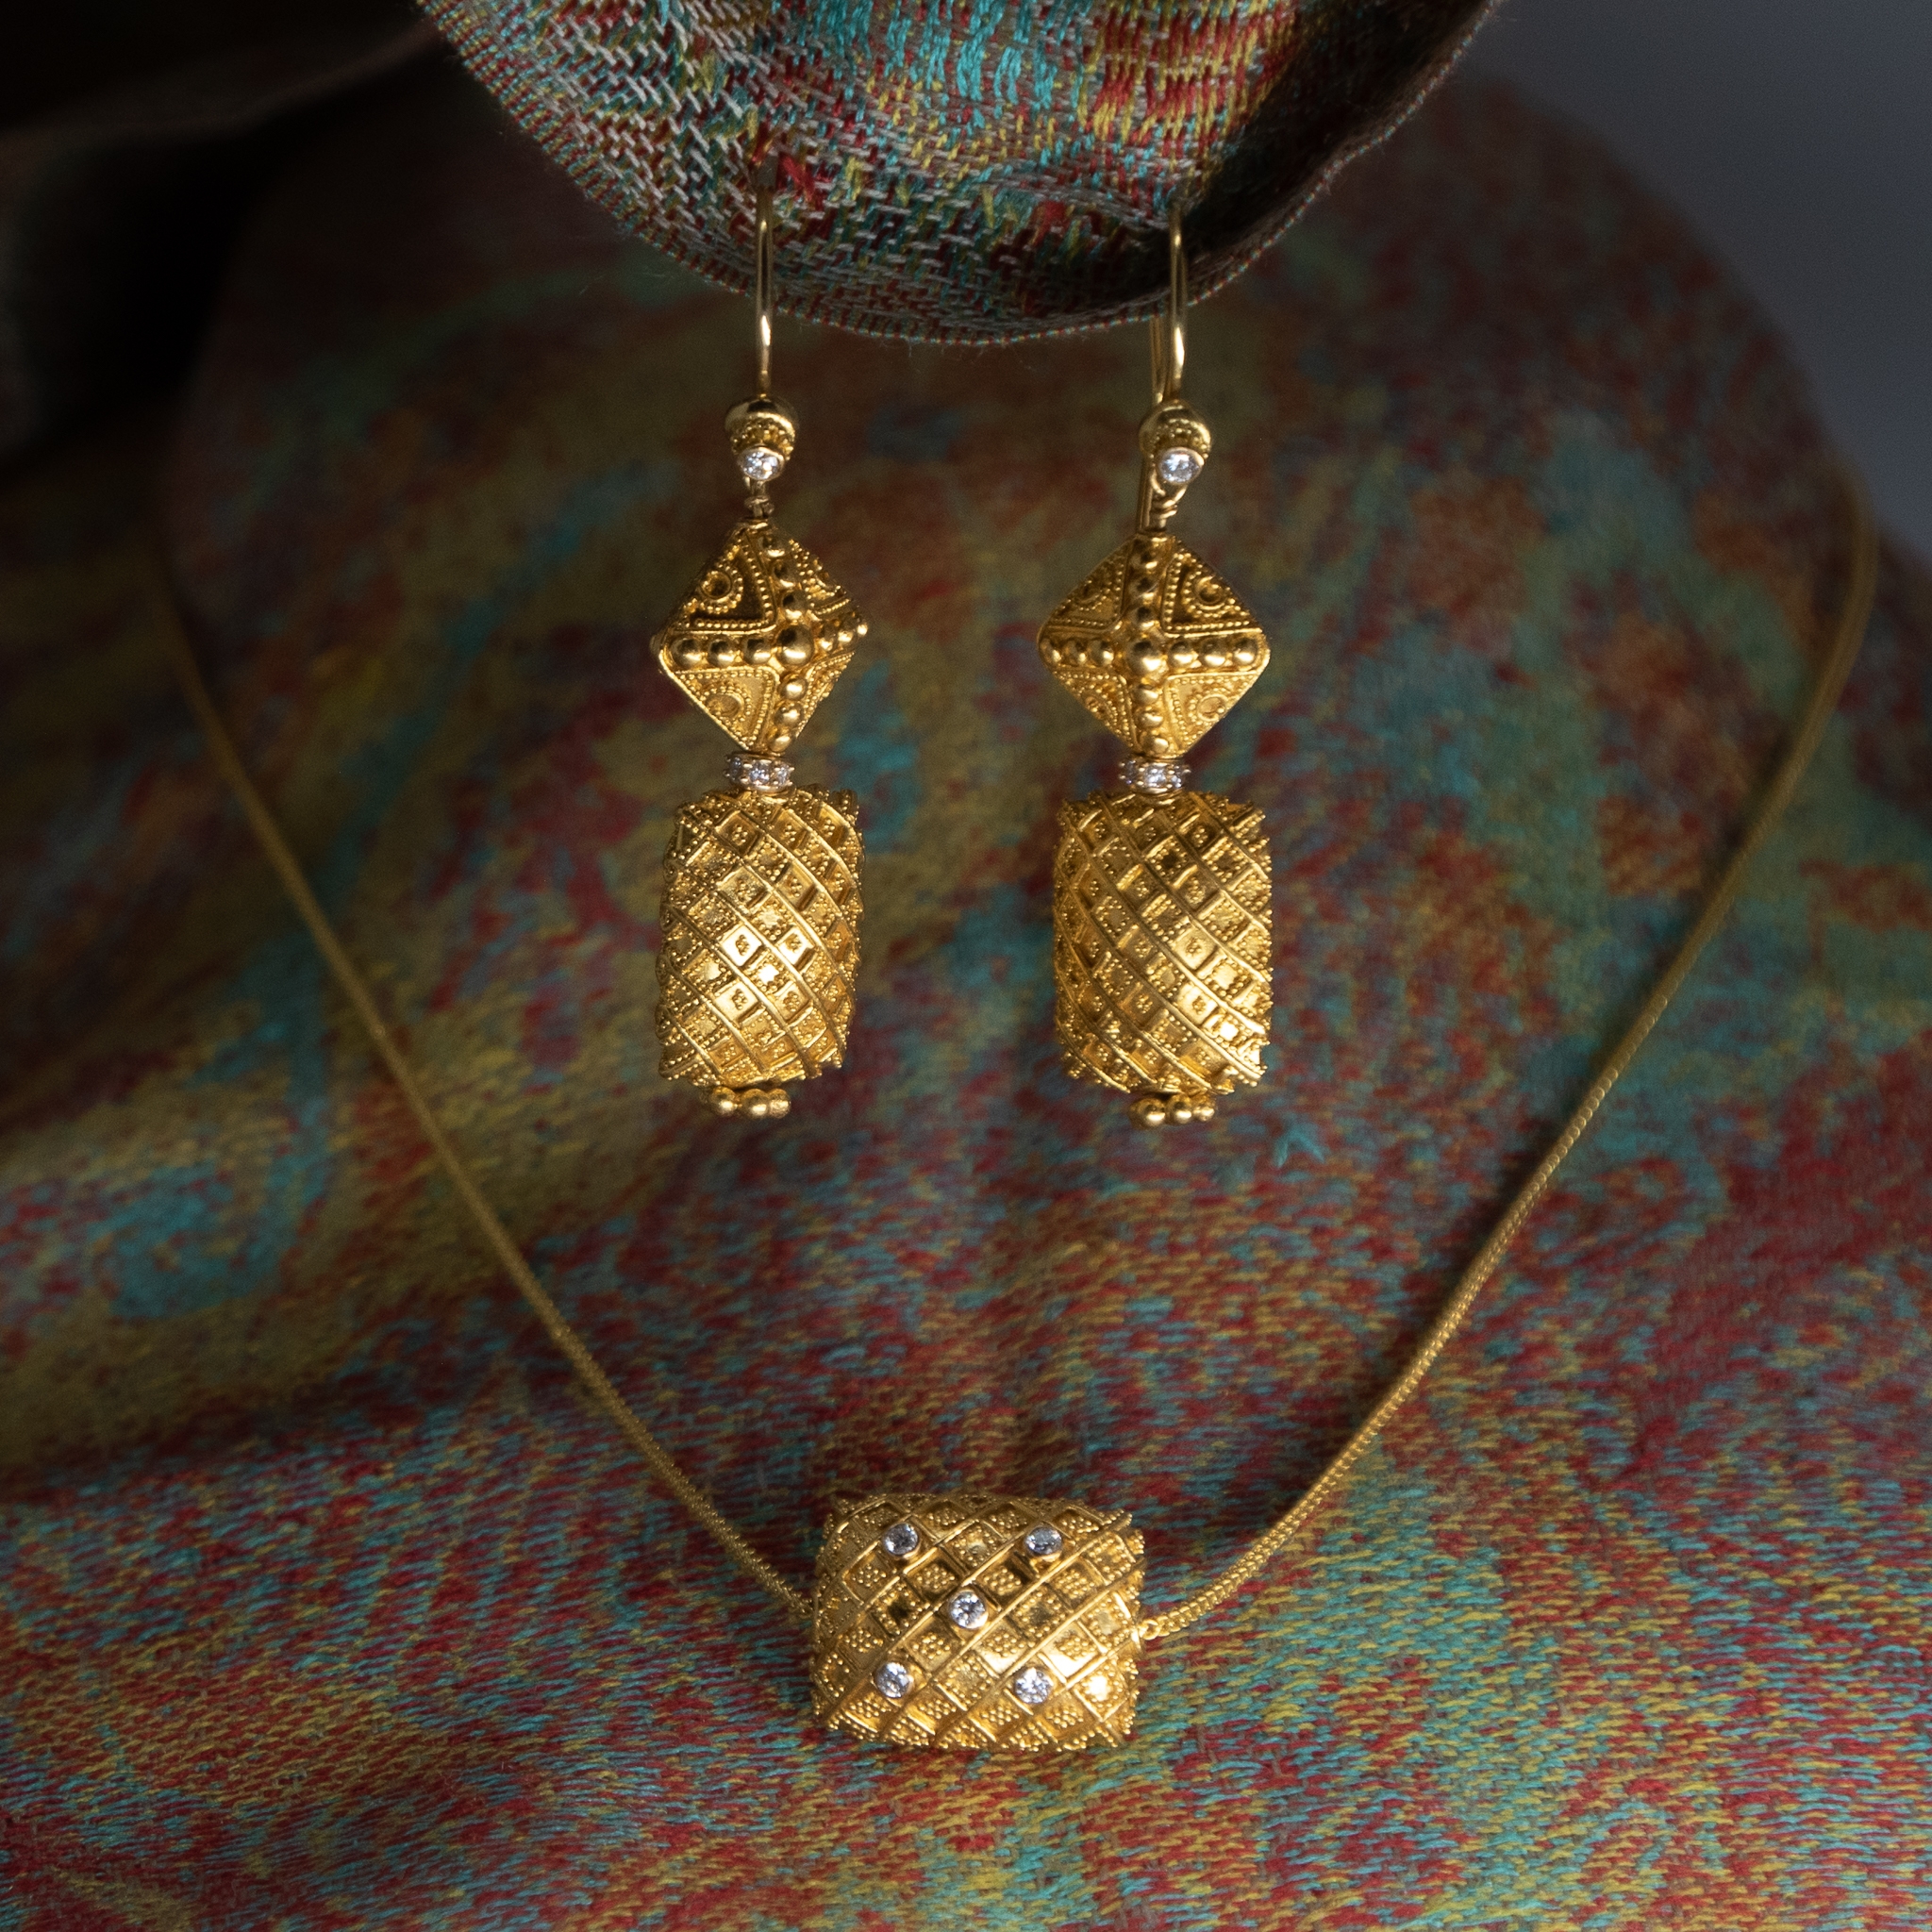 Bali Gold granulated bead earrings with diamond rondelles